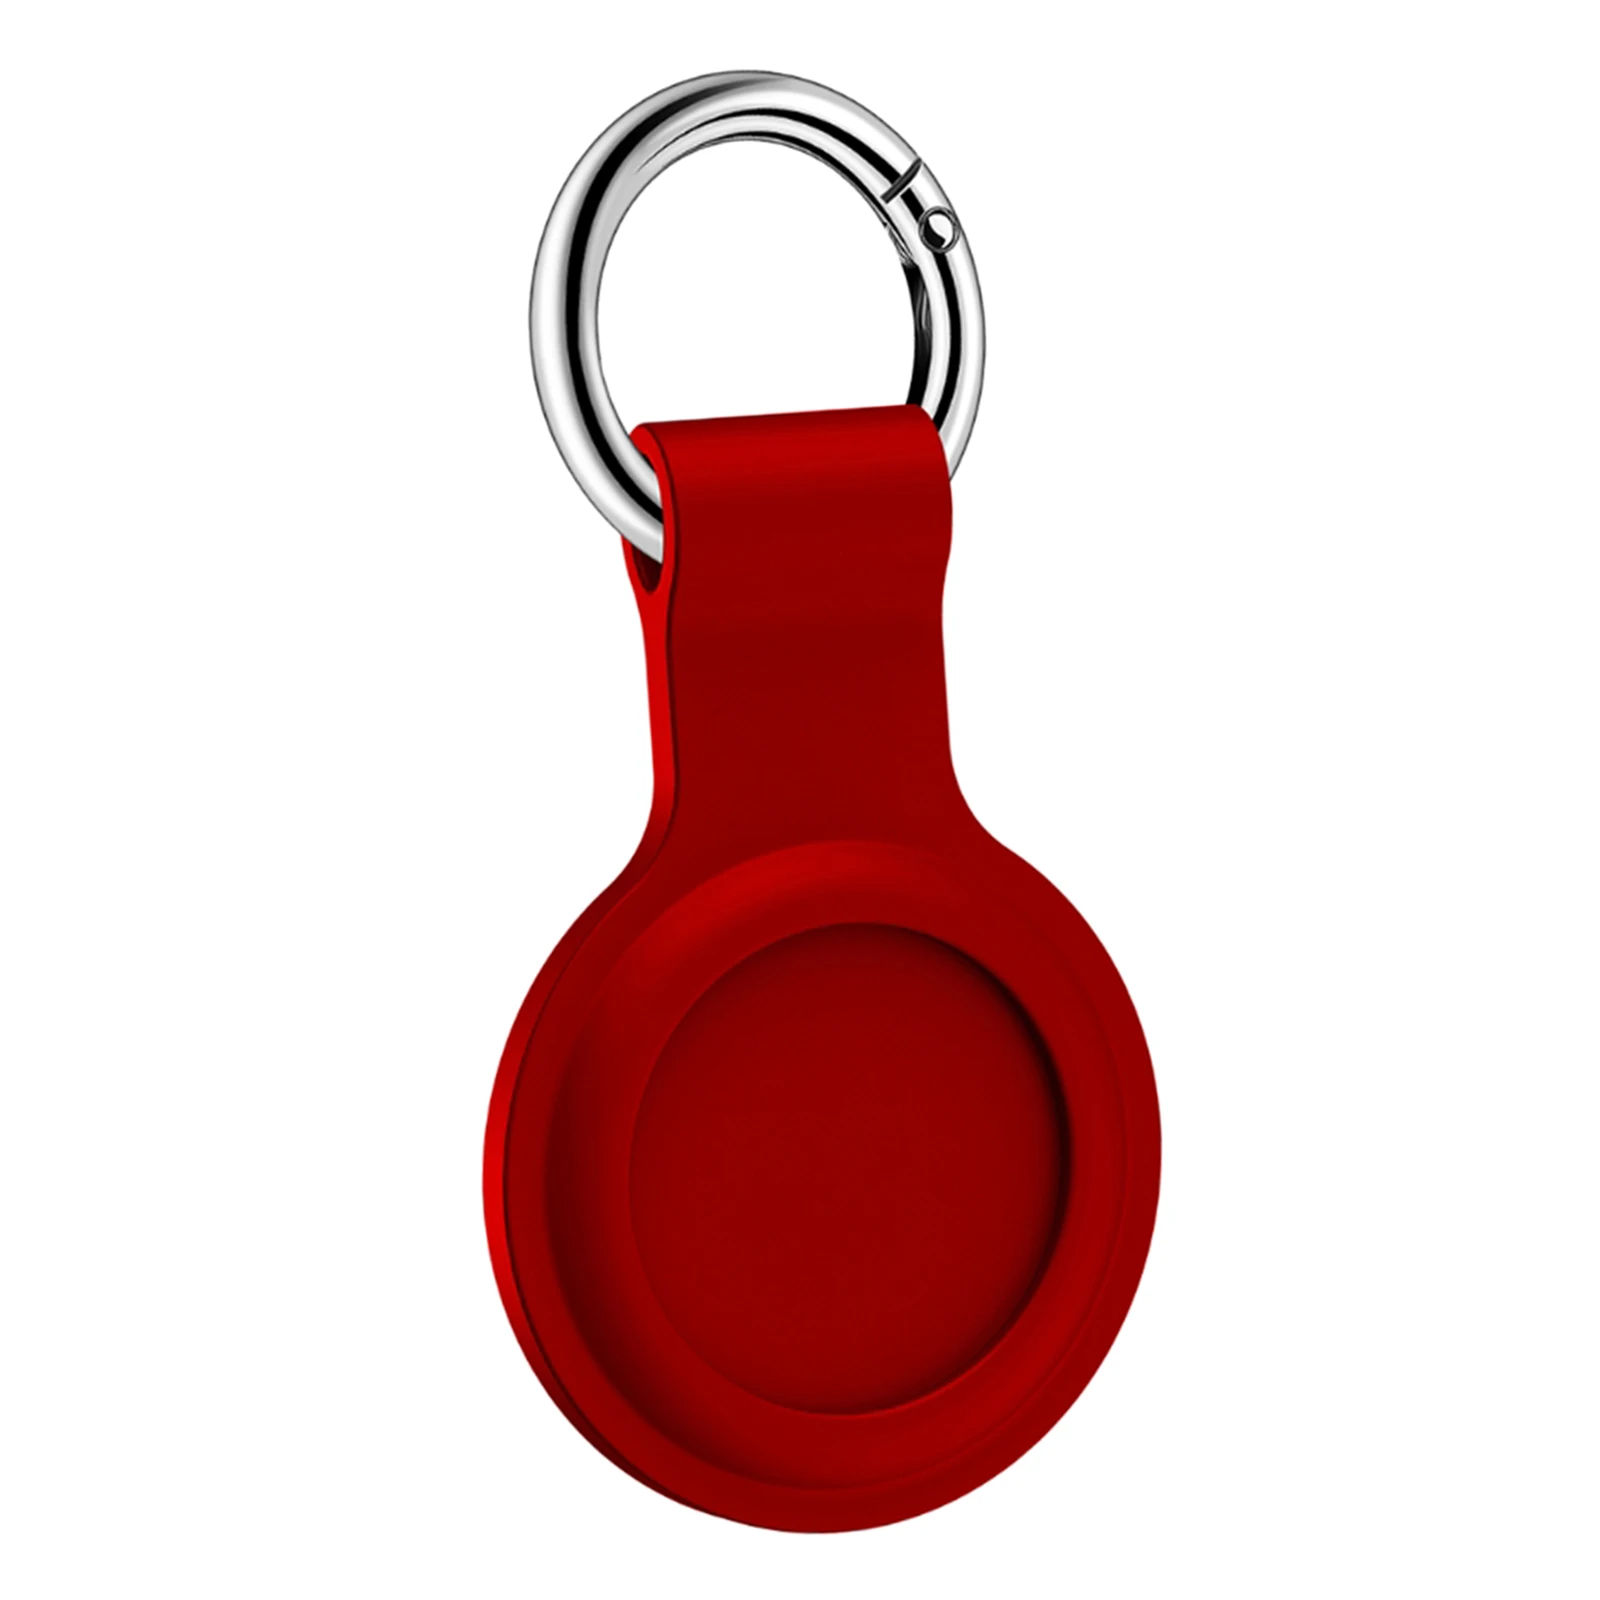 Soft Silicone Protective Cover Skin Case Keychain Compatible with AirTags